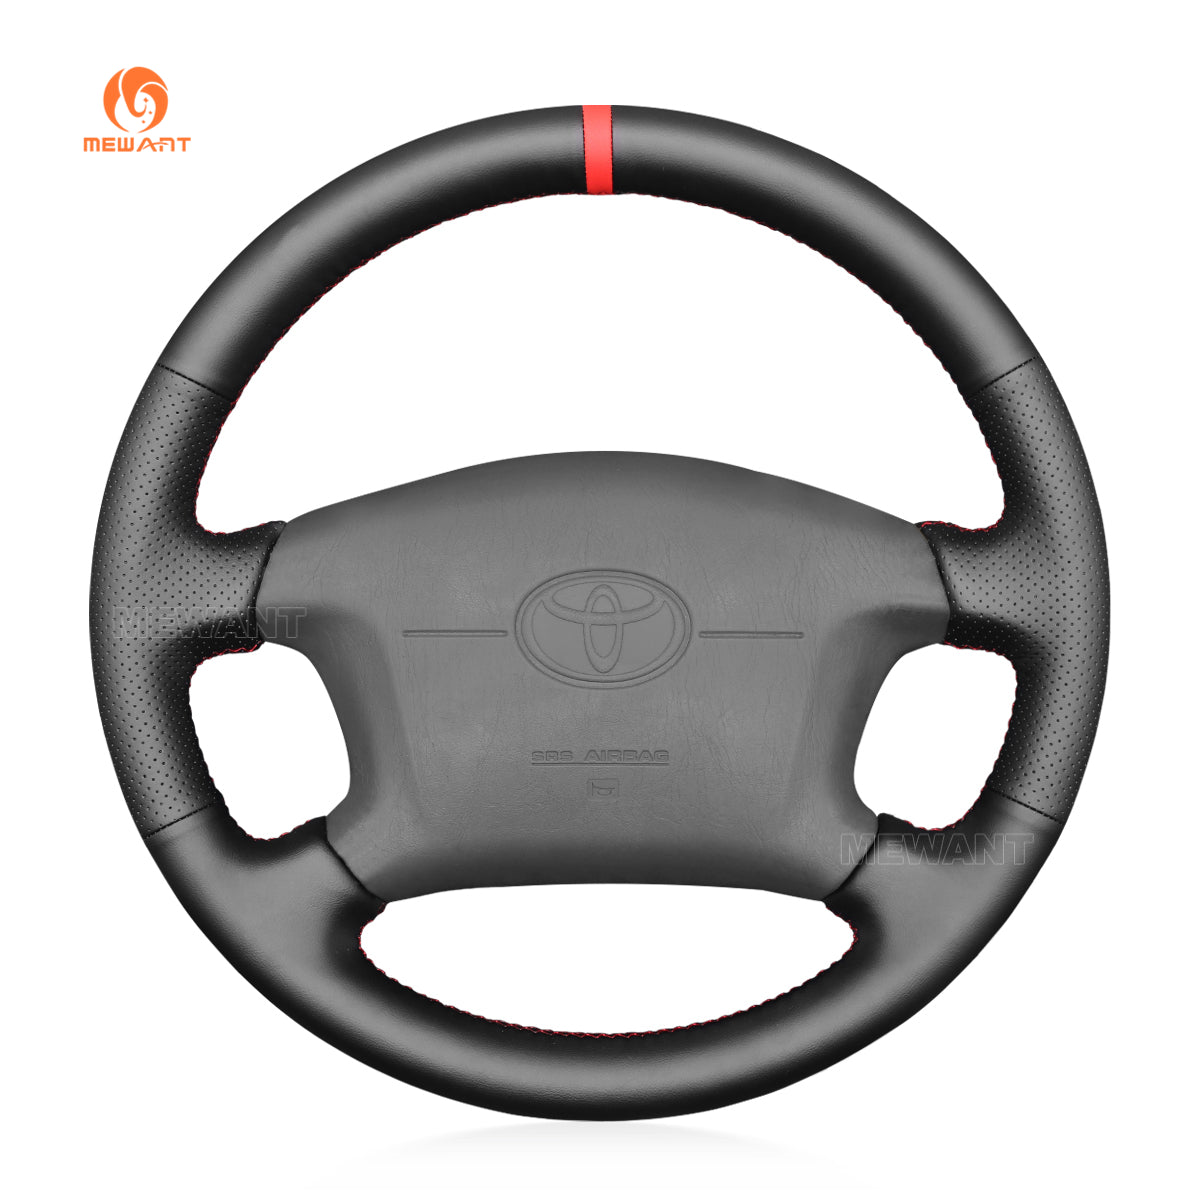 MEWANT Hand Stitch Black Leather Suede Car Steering Wheel Cover for Toyota 4Runner Camry Corolla Sienna Tundra